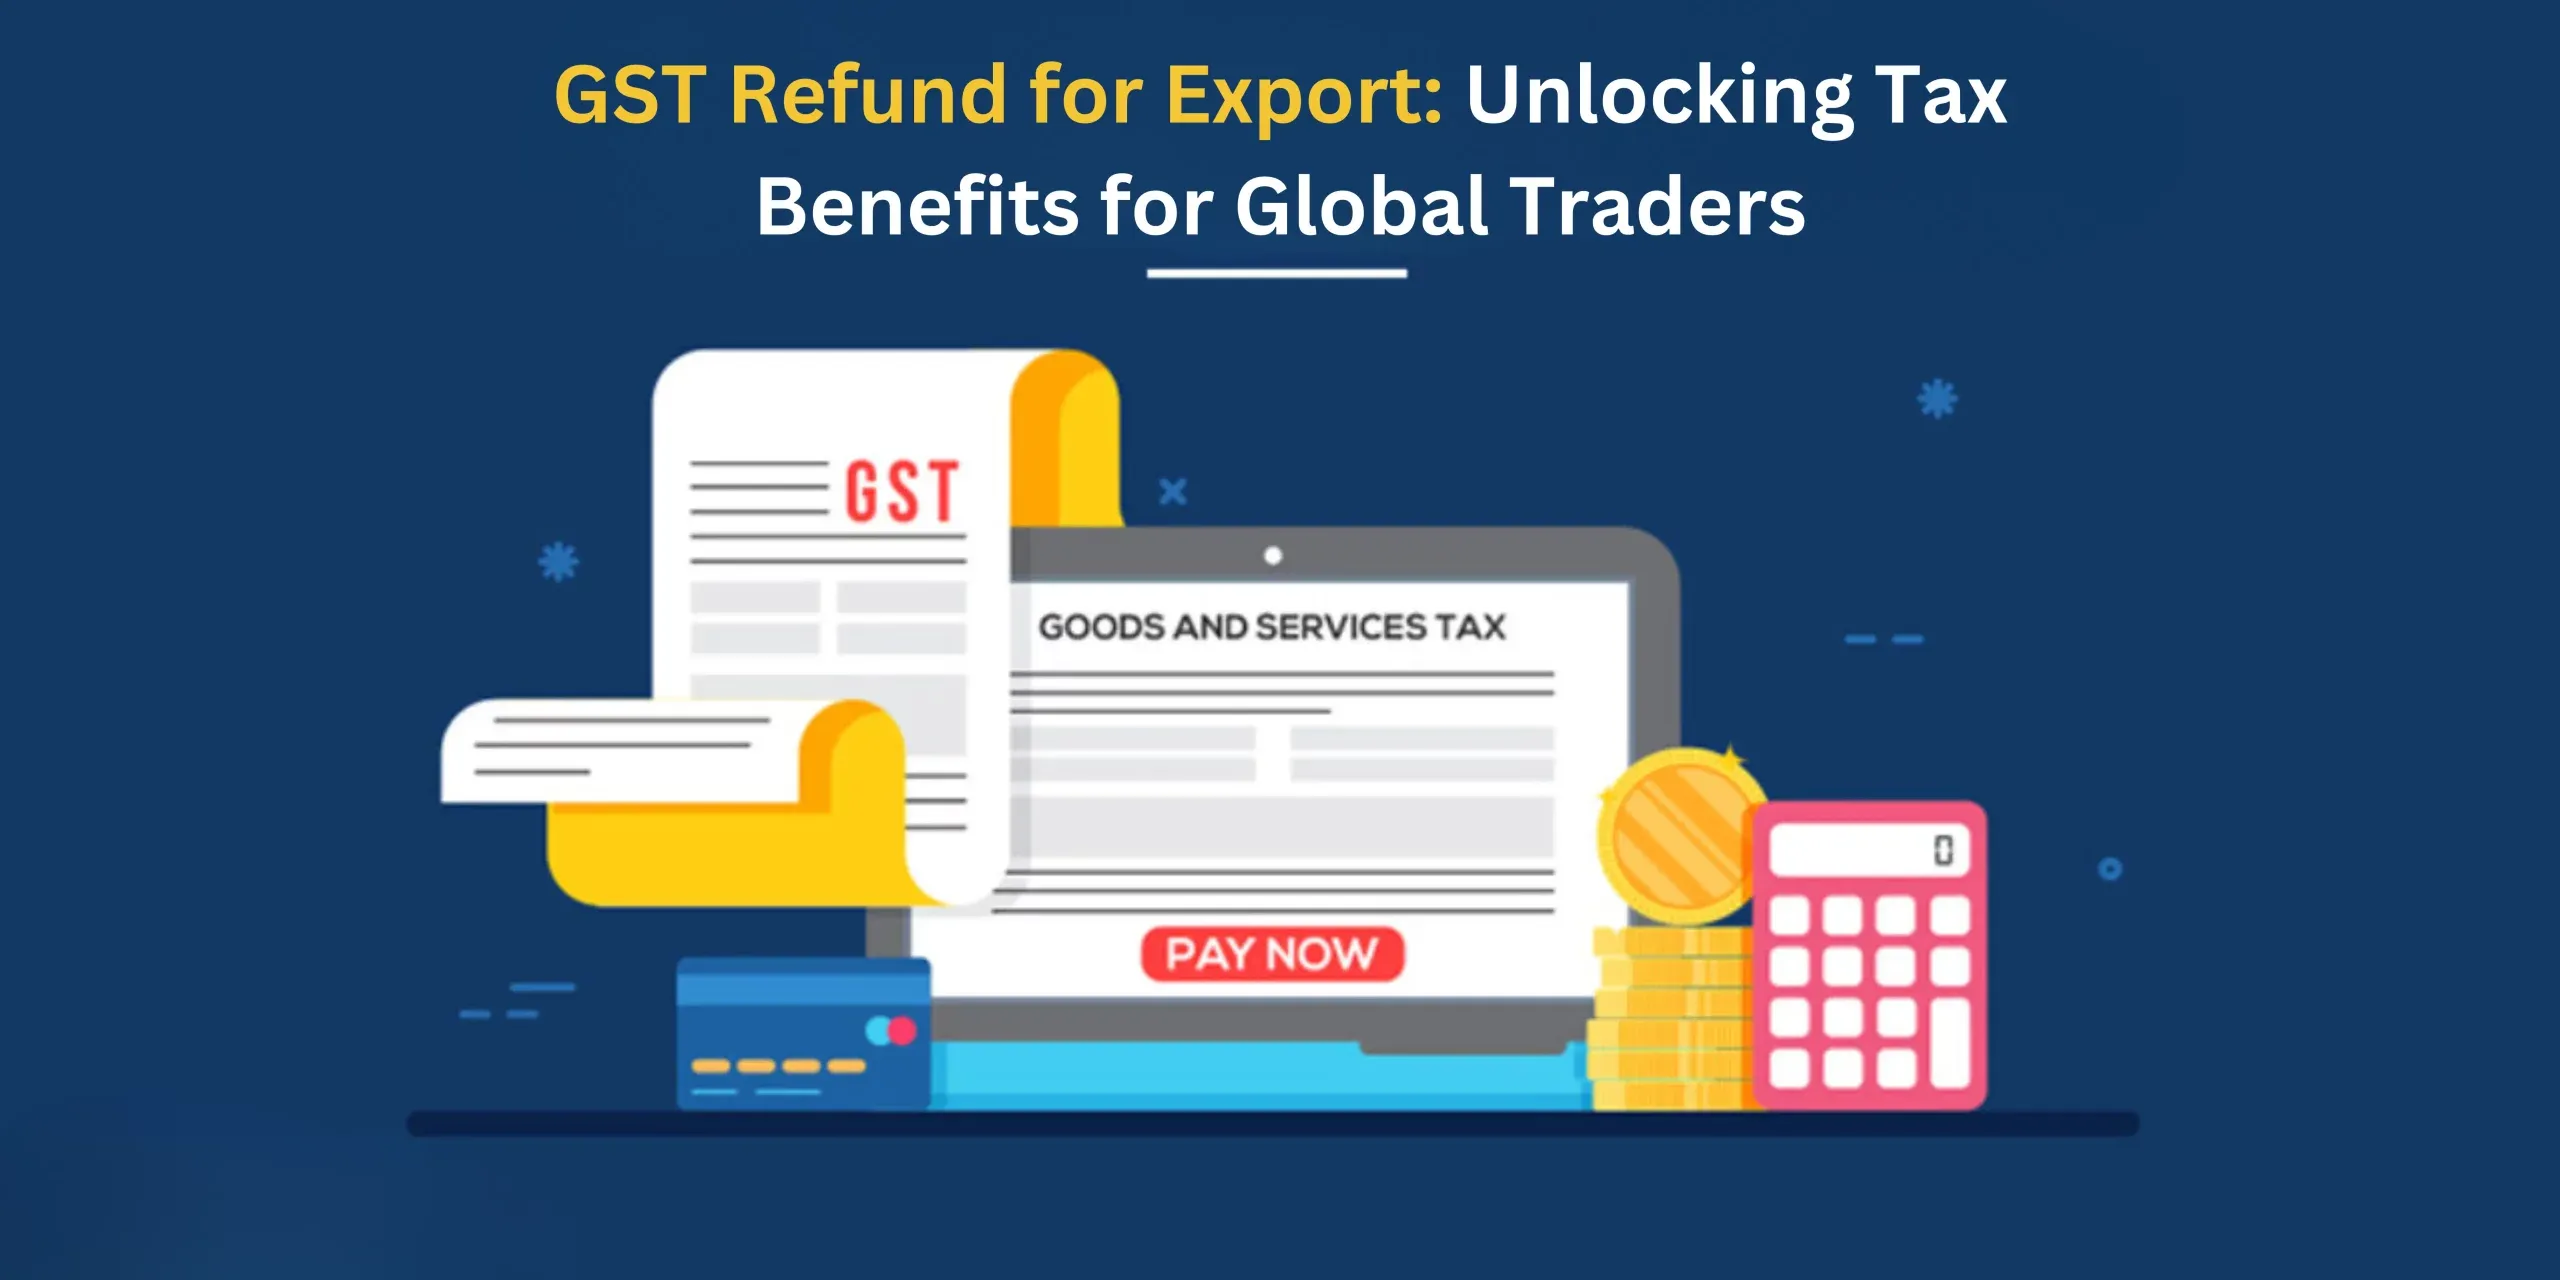 GST Refund for Export Unlocking Tax Benefits for Global Traders